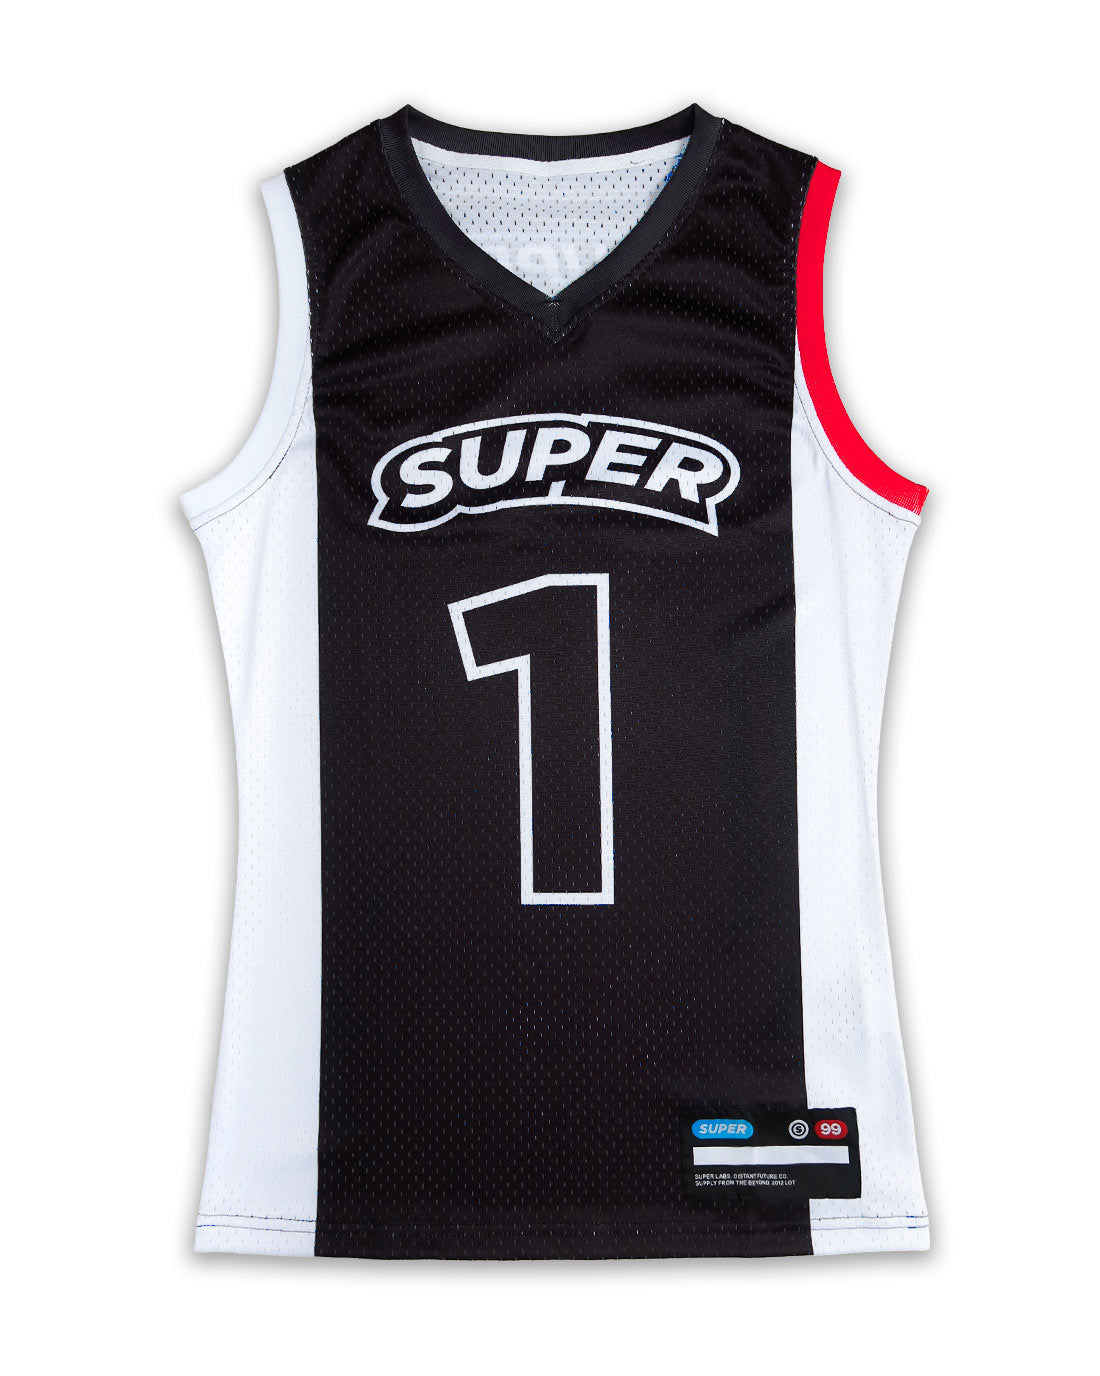 Front view of a women's basketball jersey in classic black and white, featuring lightweight mesh fabric, sleeveless design, and number 1 printed on the torso.